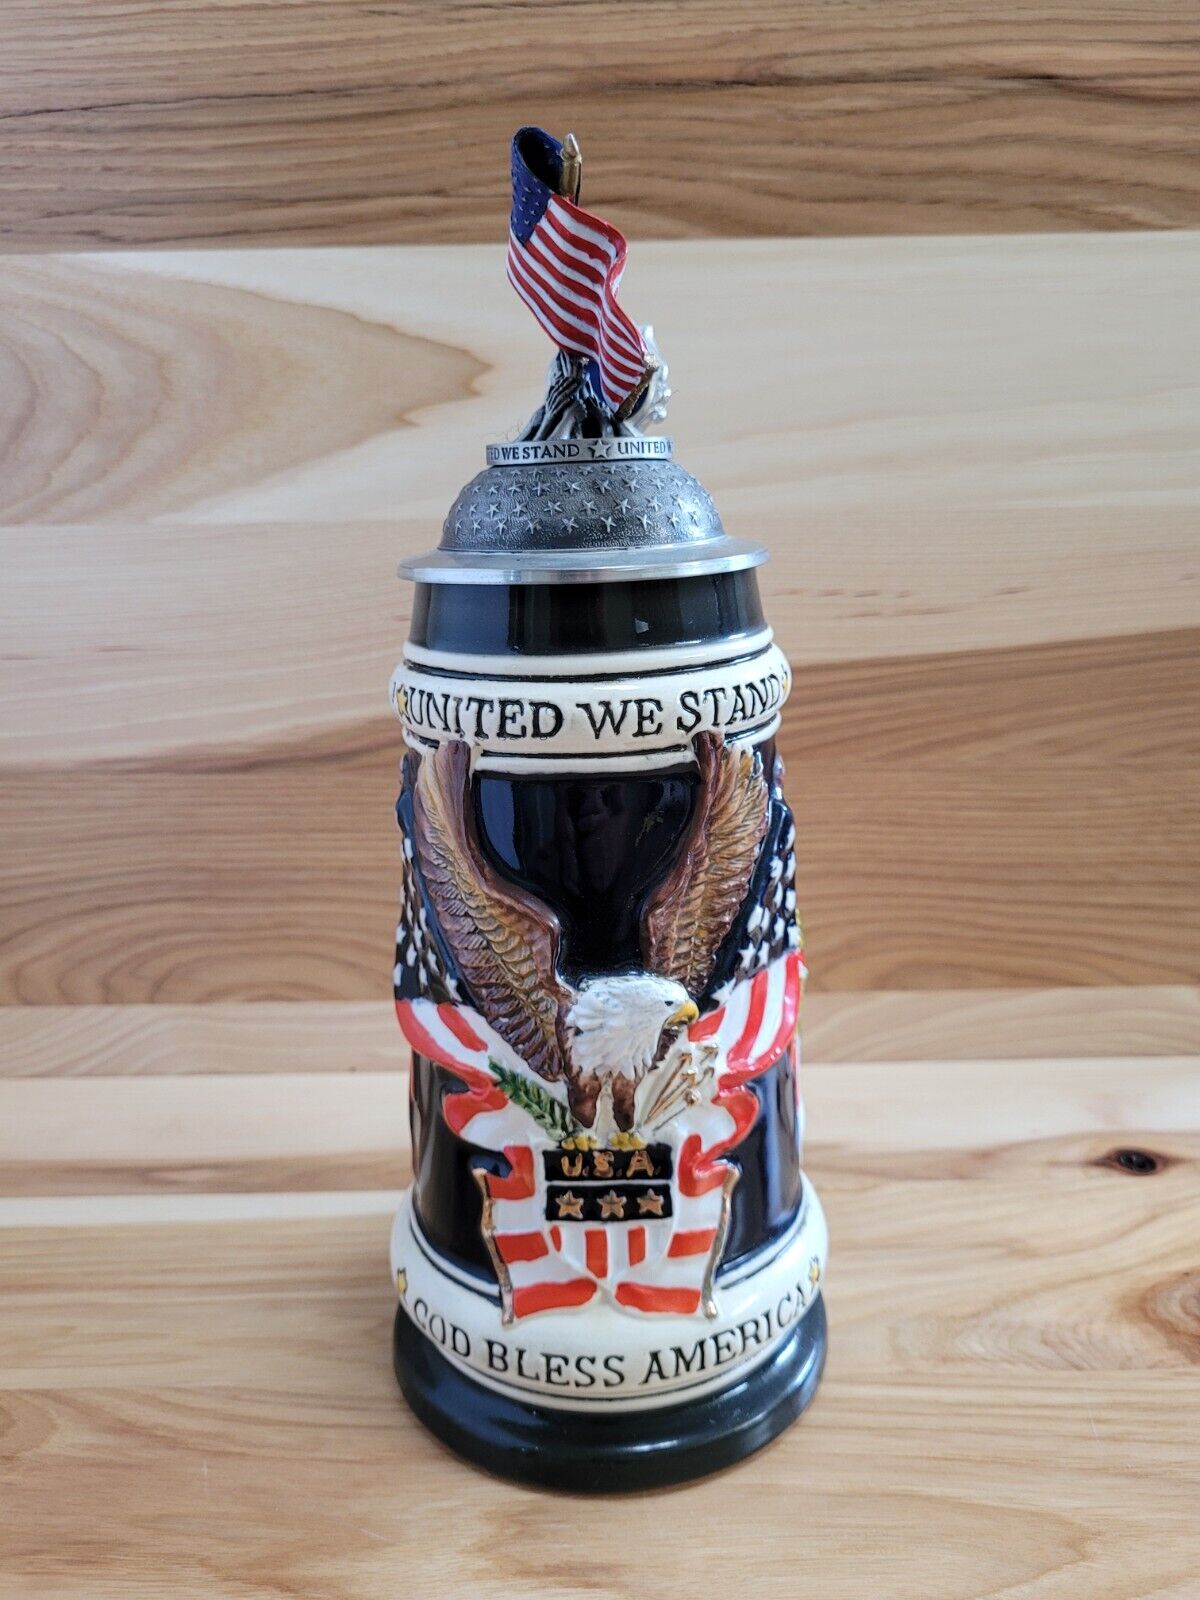 (RARE) WW-Team Limited Edition - America The Beautiful Beer Stein #222 / 1000